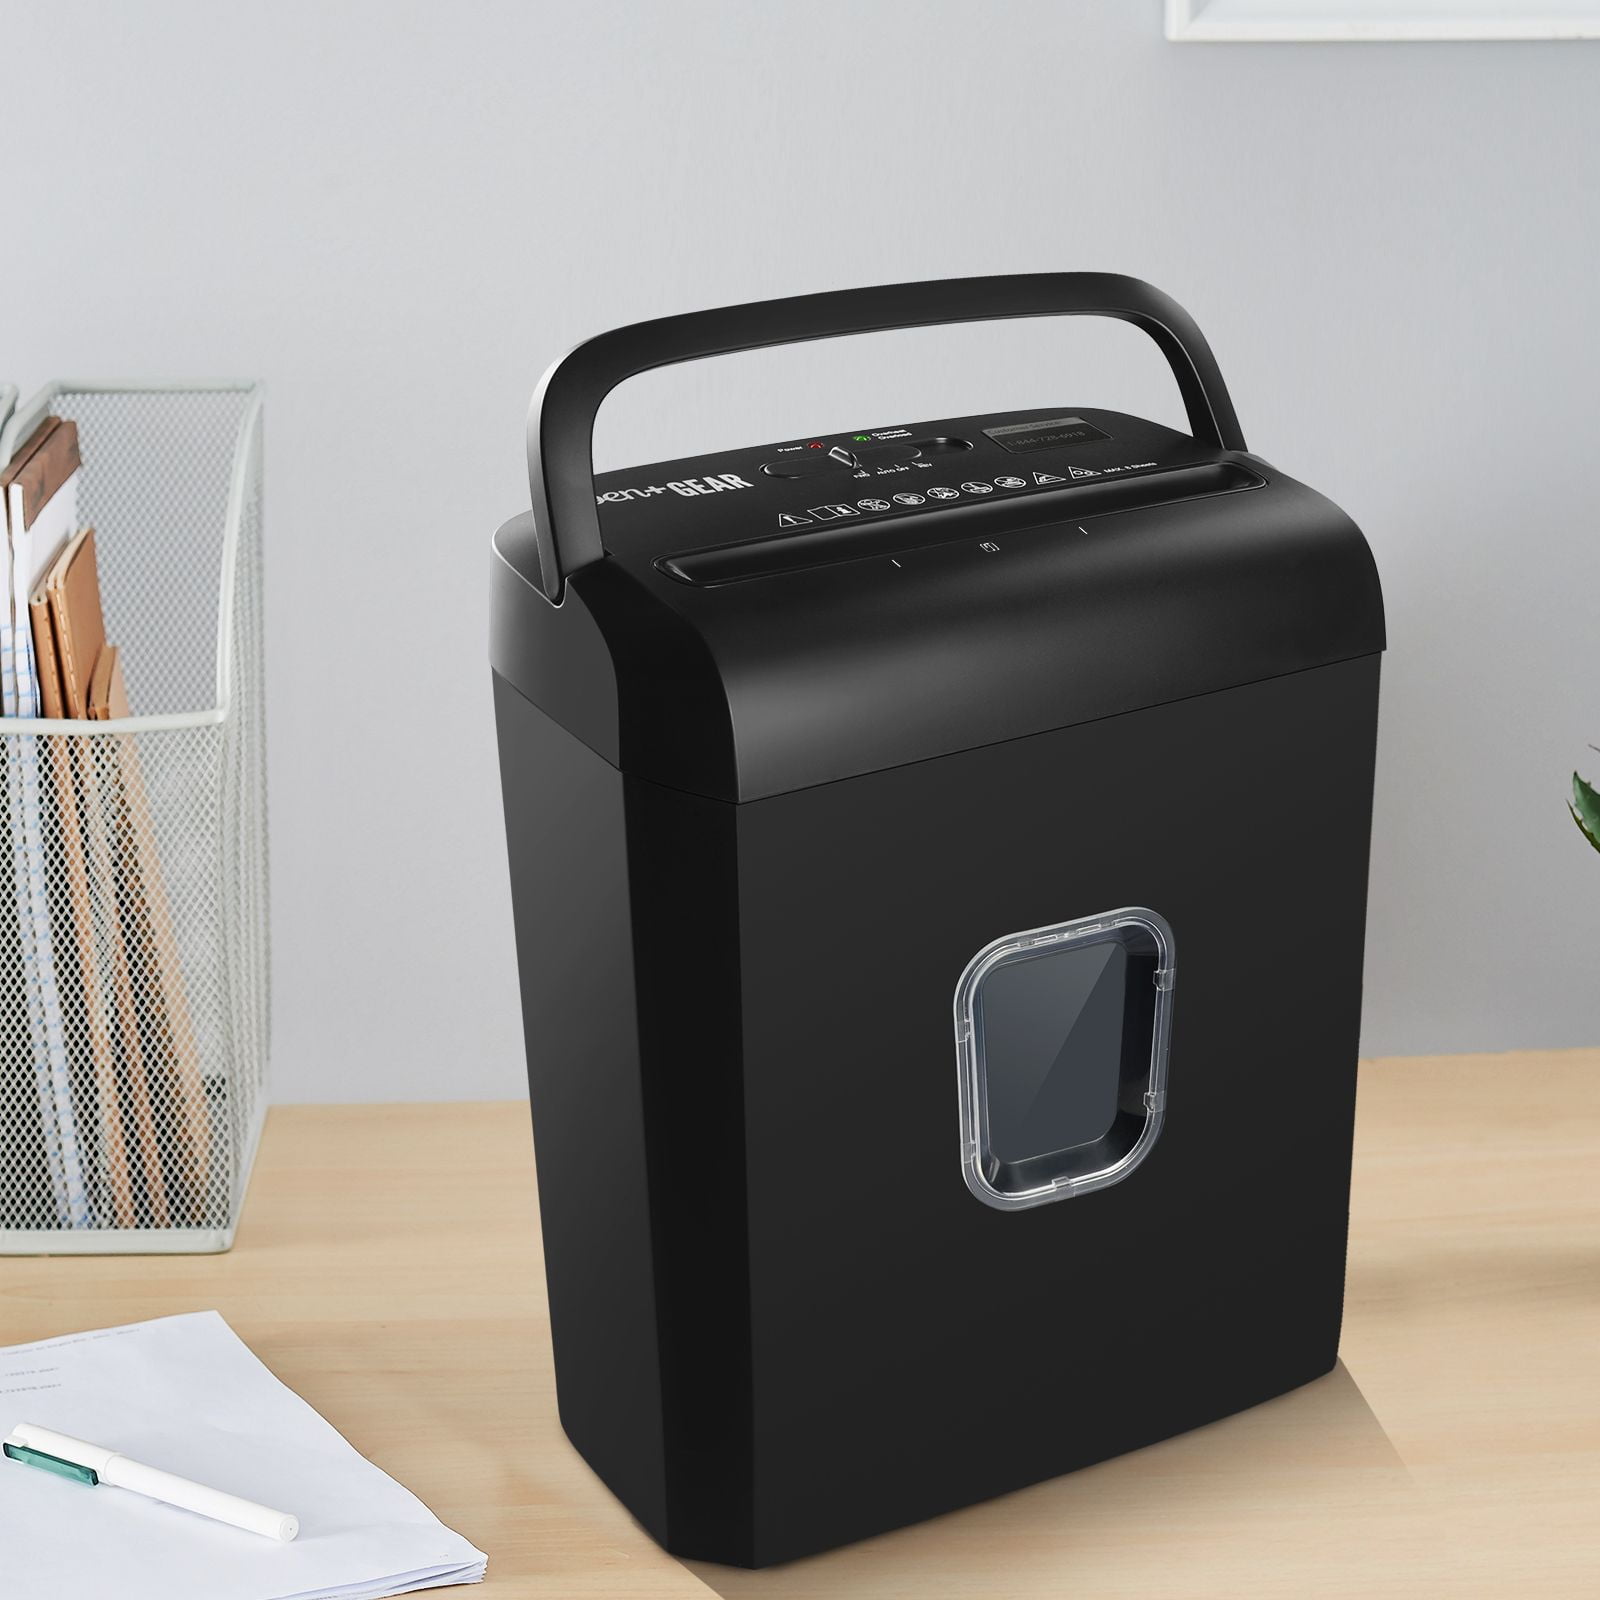   Basics 24 Sheet Cross Cut Paper, CD and Credit Card Home  Office Shredder with Pullout Basket, Black : Office Products